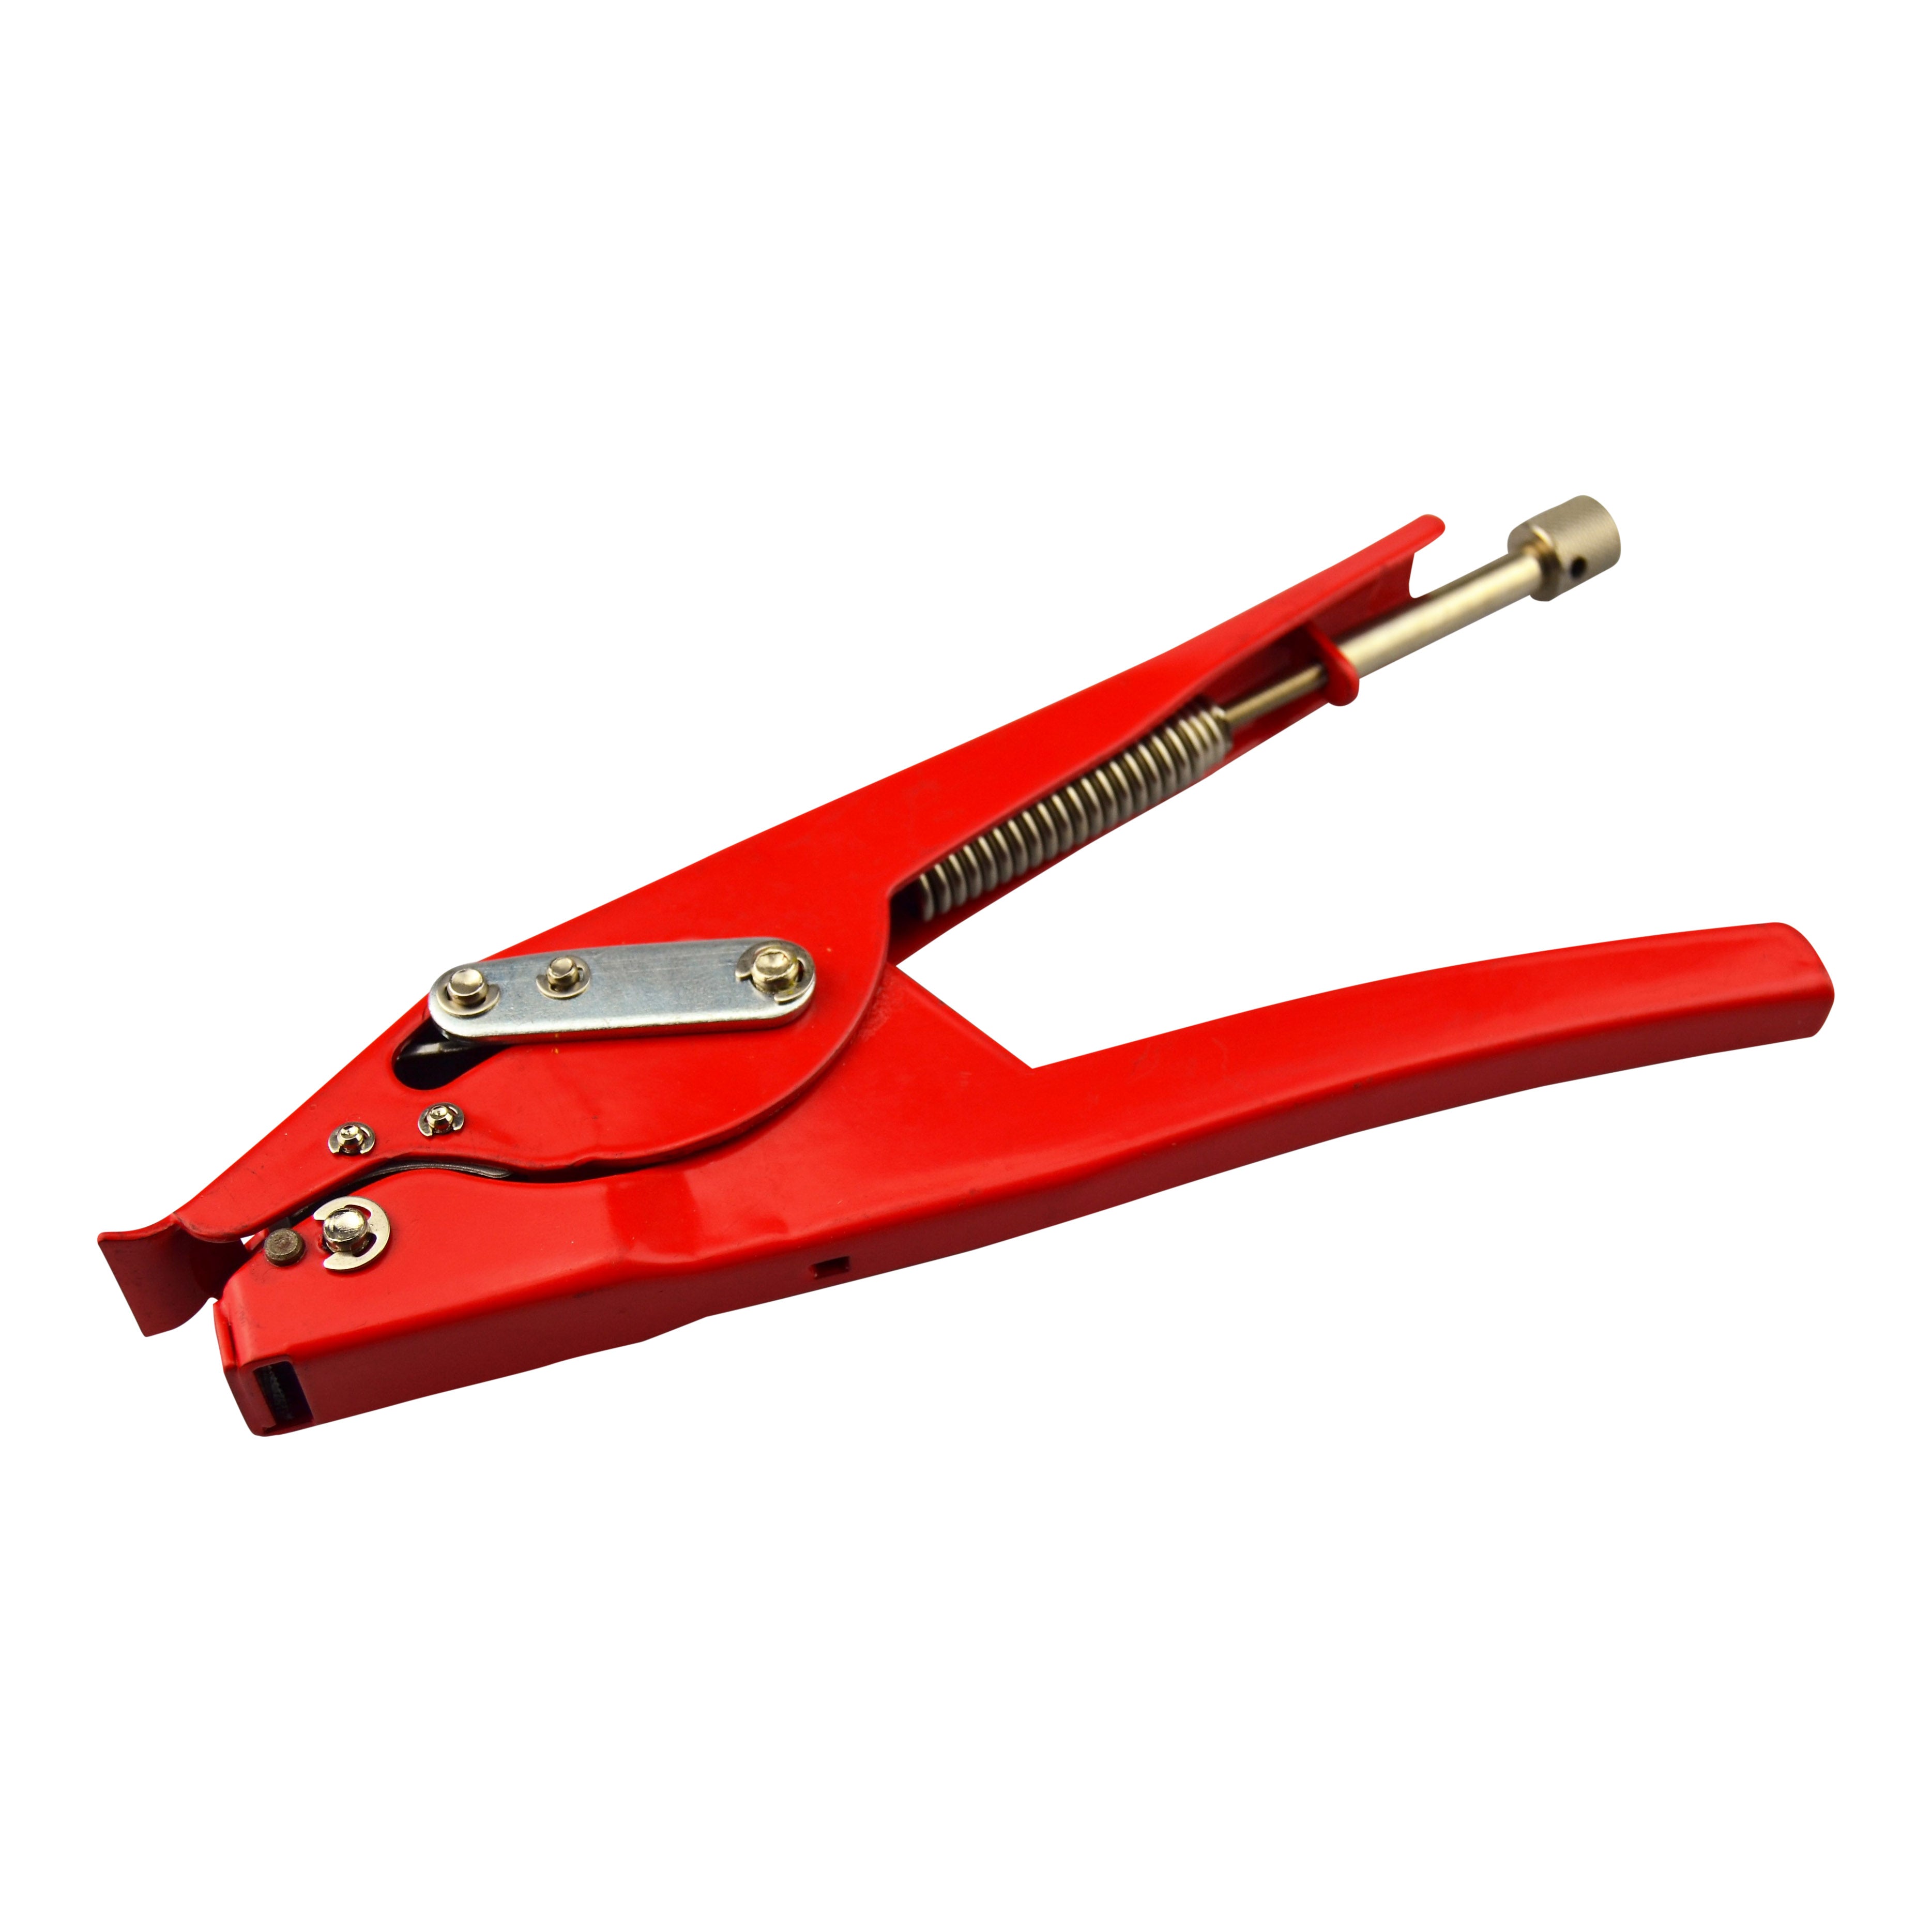 Automatic Cable Tie Installation Tool to Suit Nylon Cable Ties up to 13mm Width